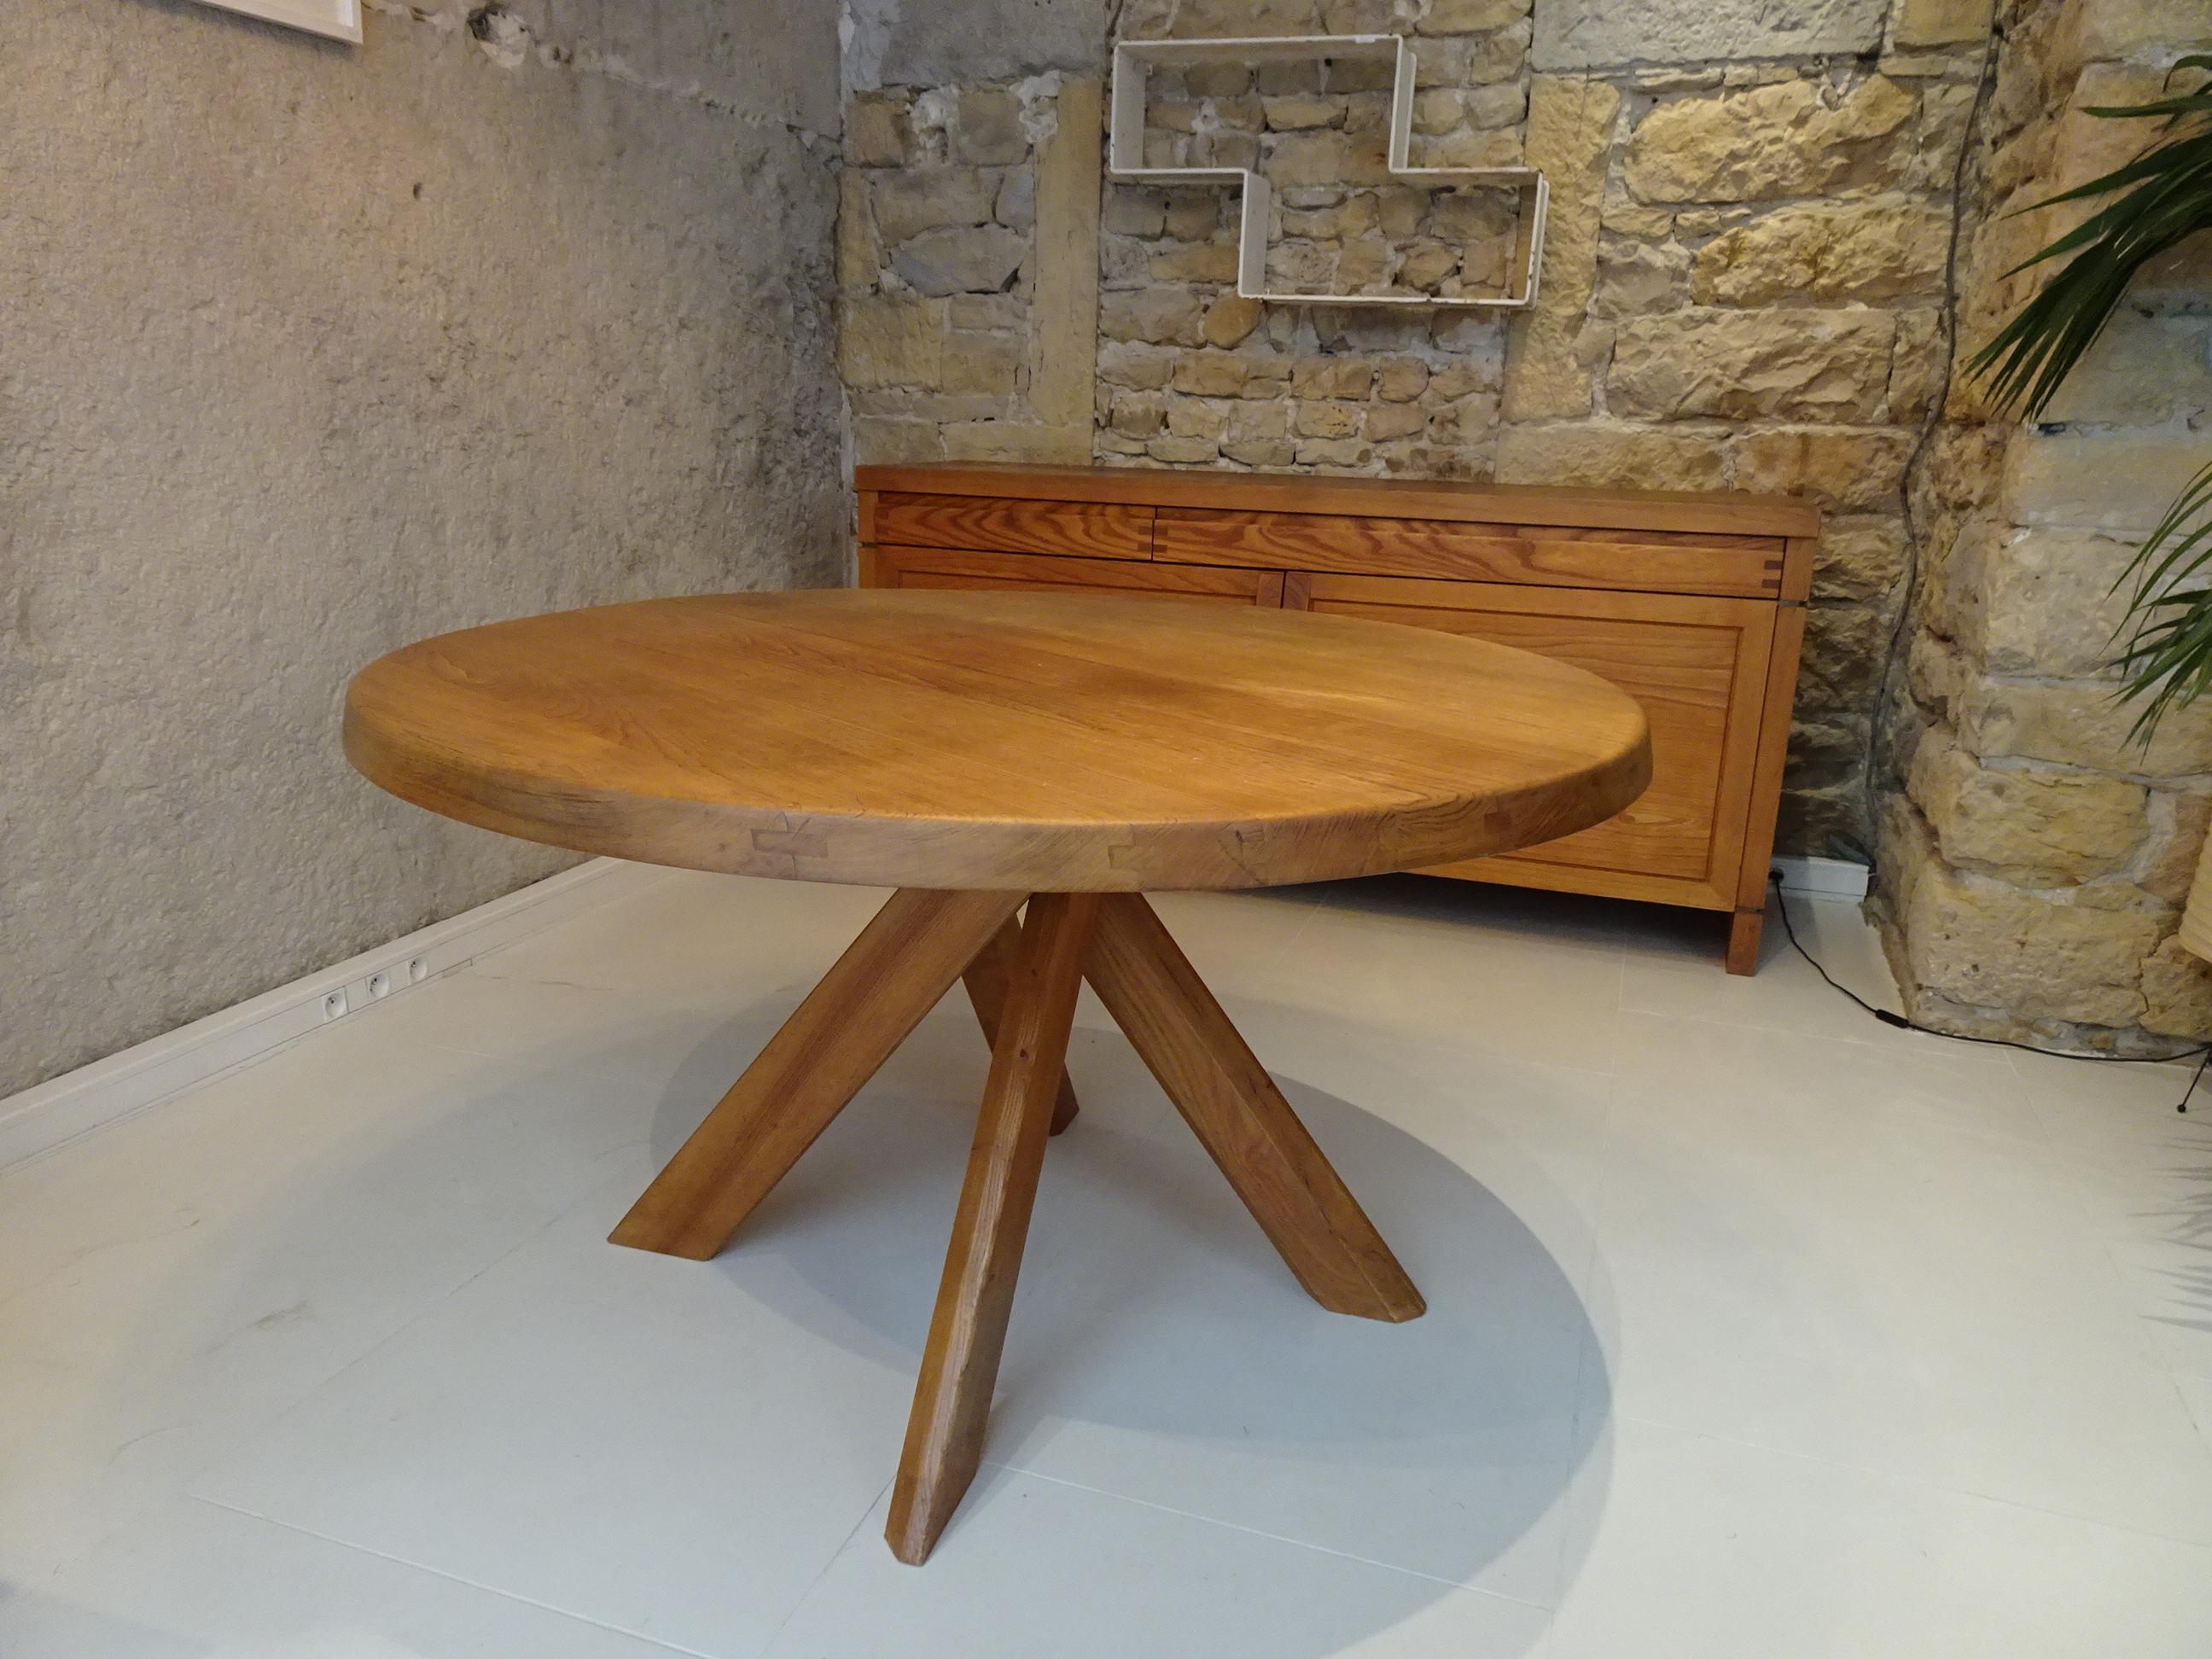 Pierre Chapo table T21d in solid elm produced in the 1970s.
Dimensions: 126 cm in diameter x 72cm height
Condition: Very good general condition, normal wear visible in photo.
  